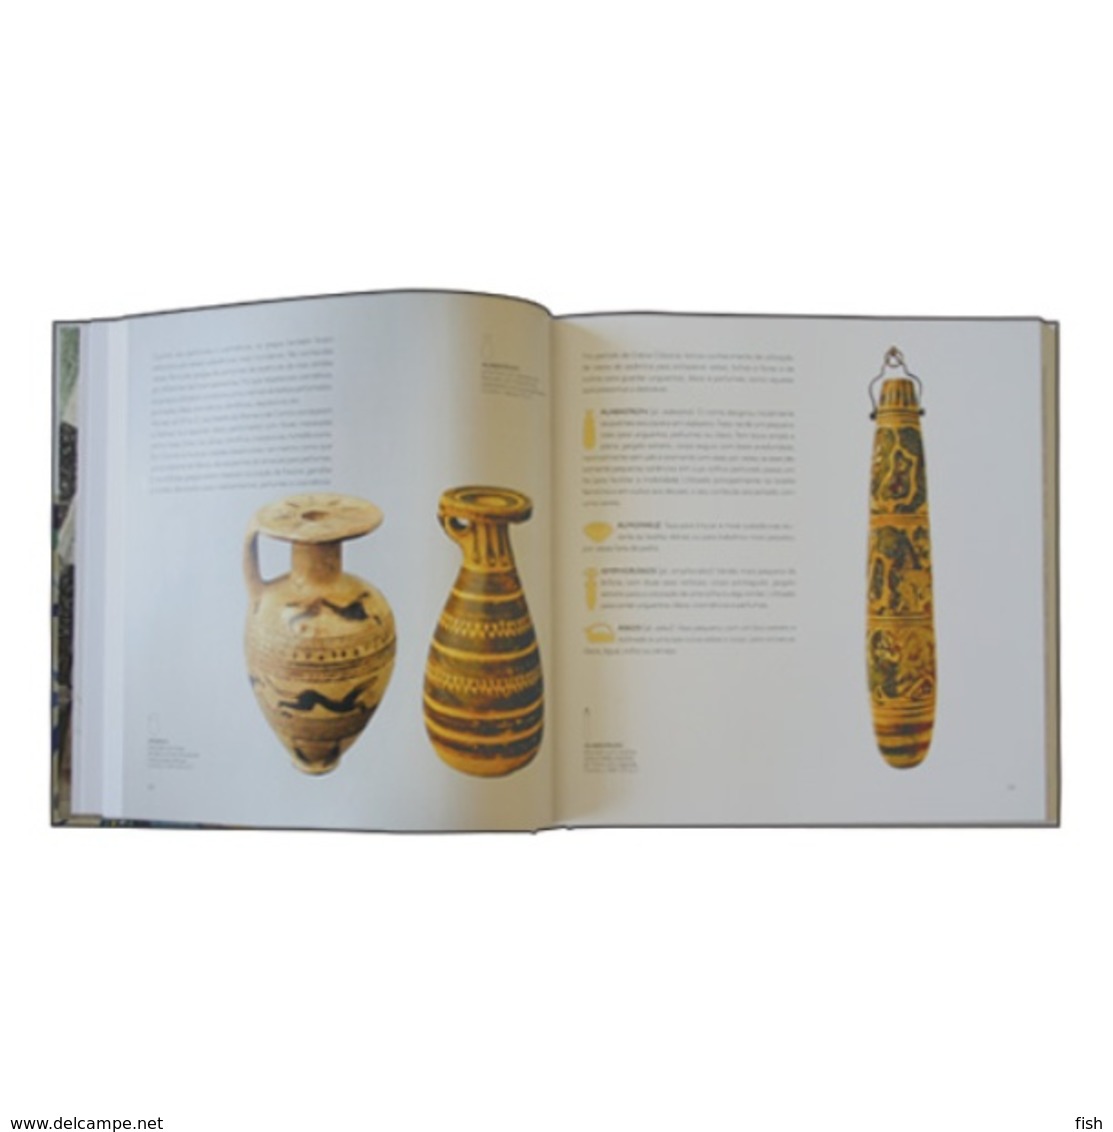 Portugal ** & CTT, Thematic Book With Stamps, Pharmaceutical Ceramics And The Art Of Healing 2009 (20195) - Livre De L'année